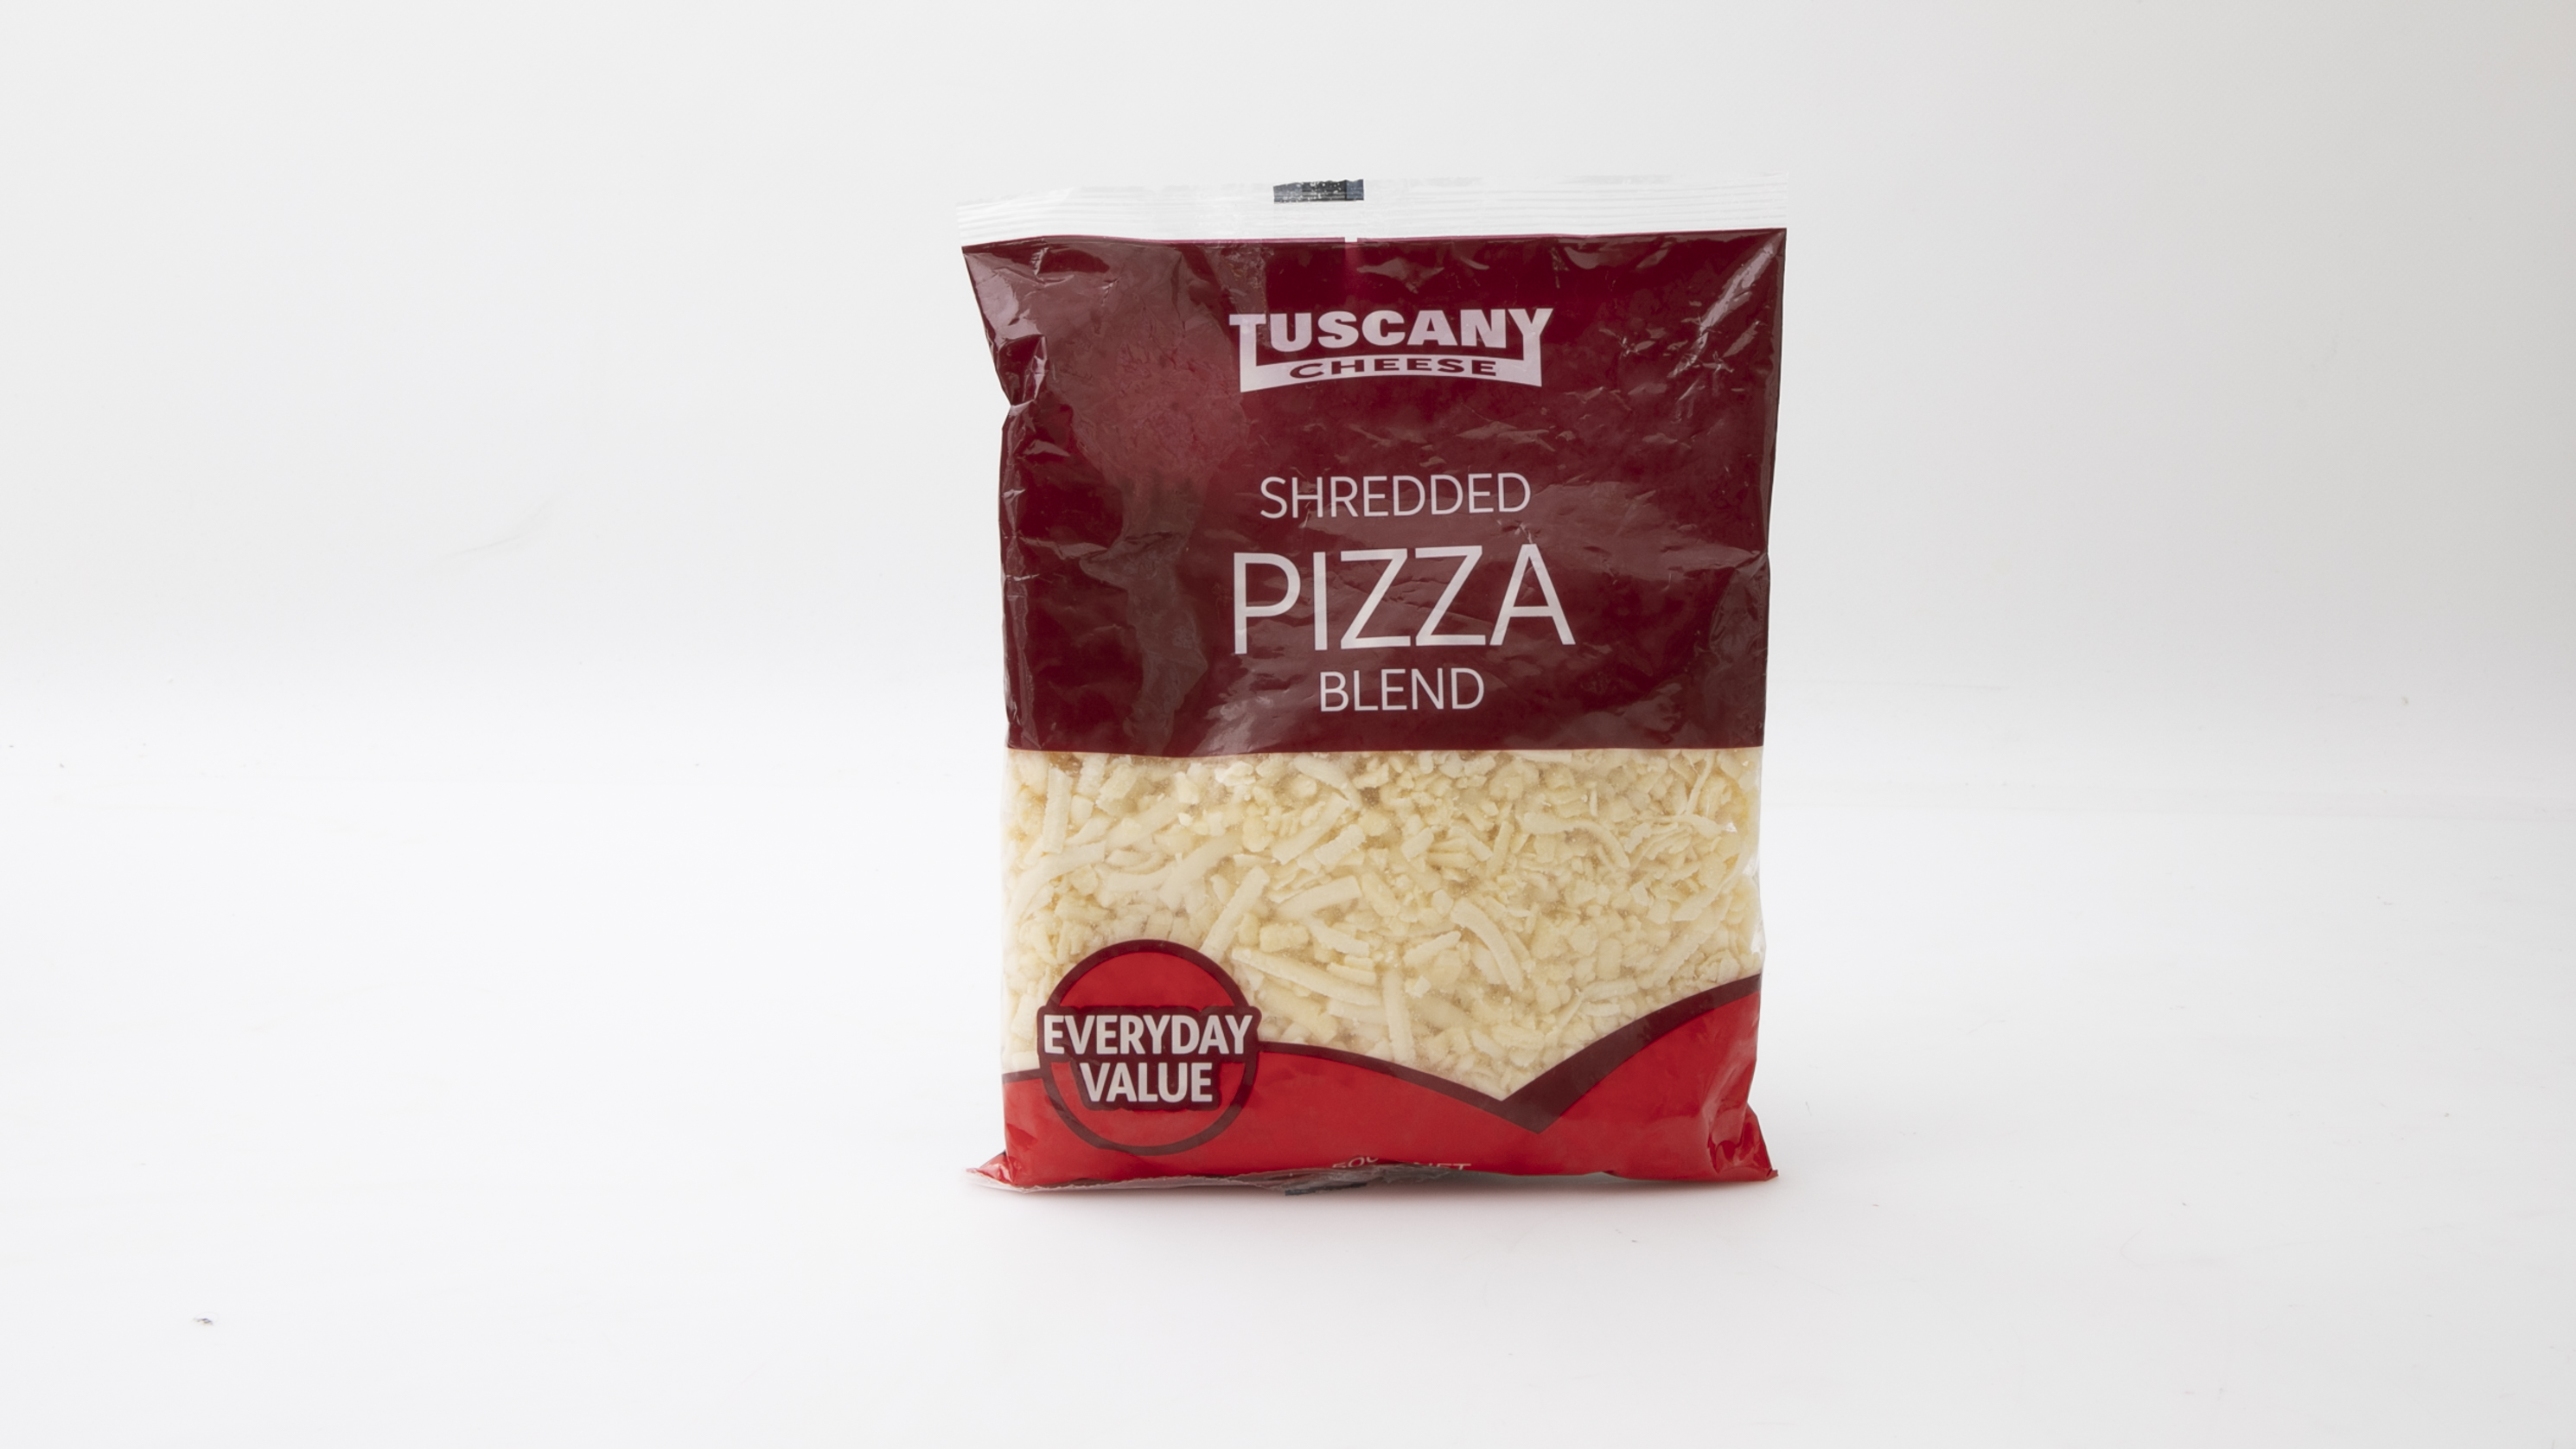 Tuscany Cheese Shredded Pizza Blend carousel image